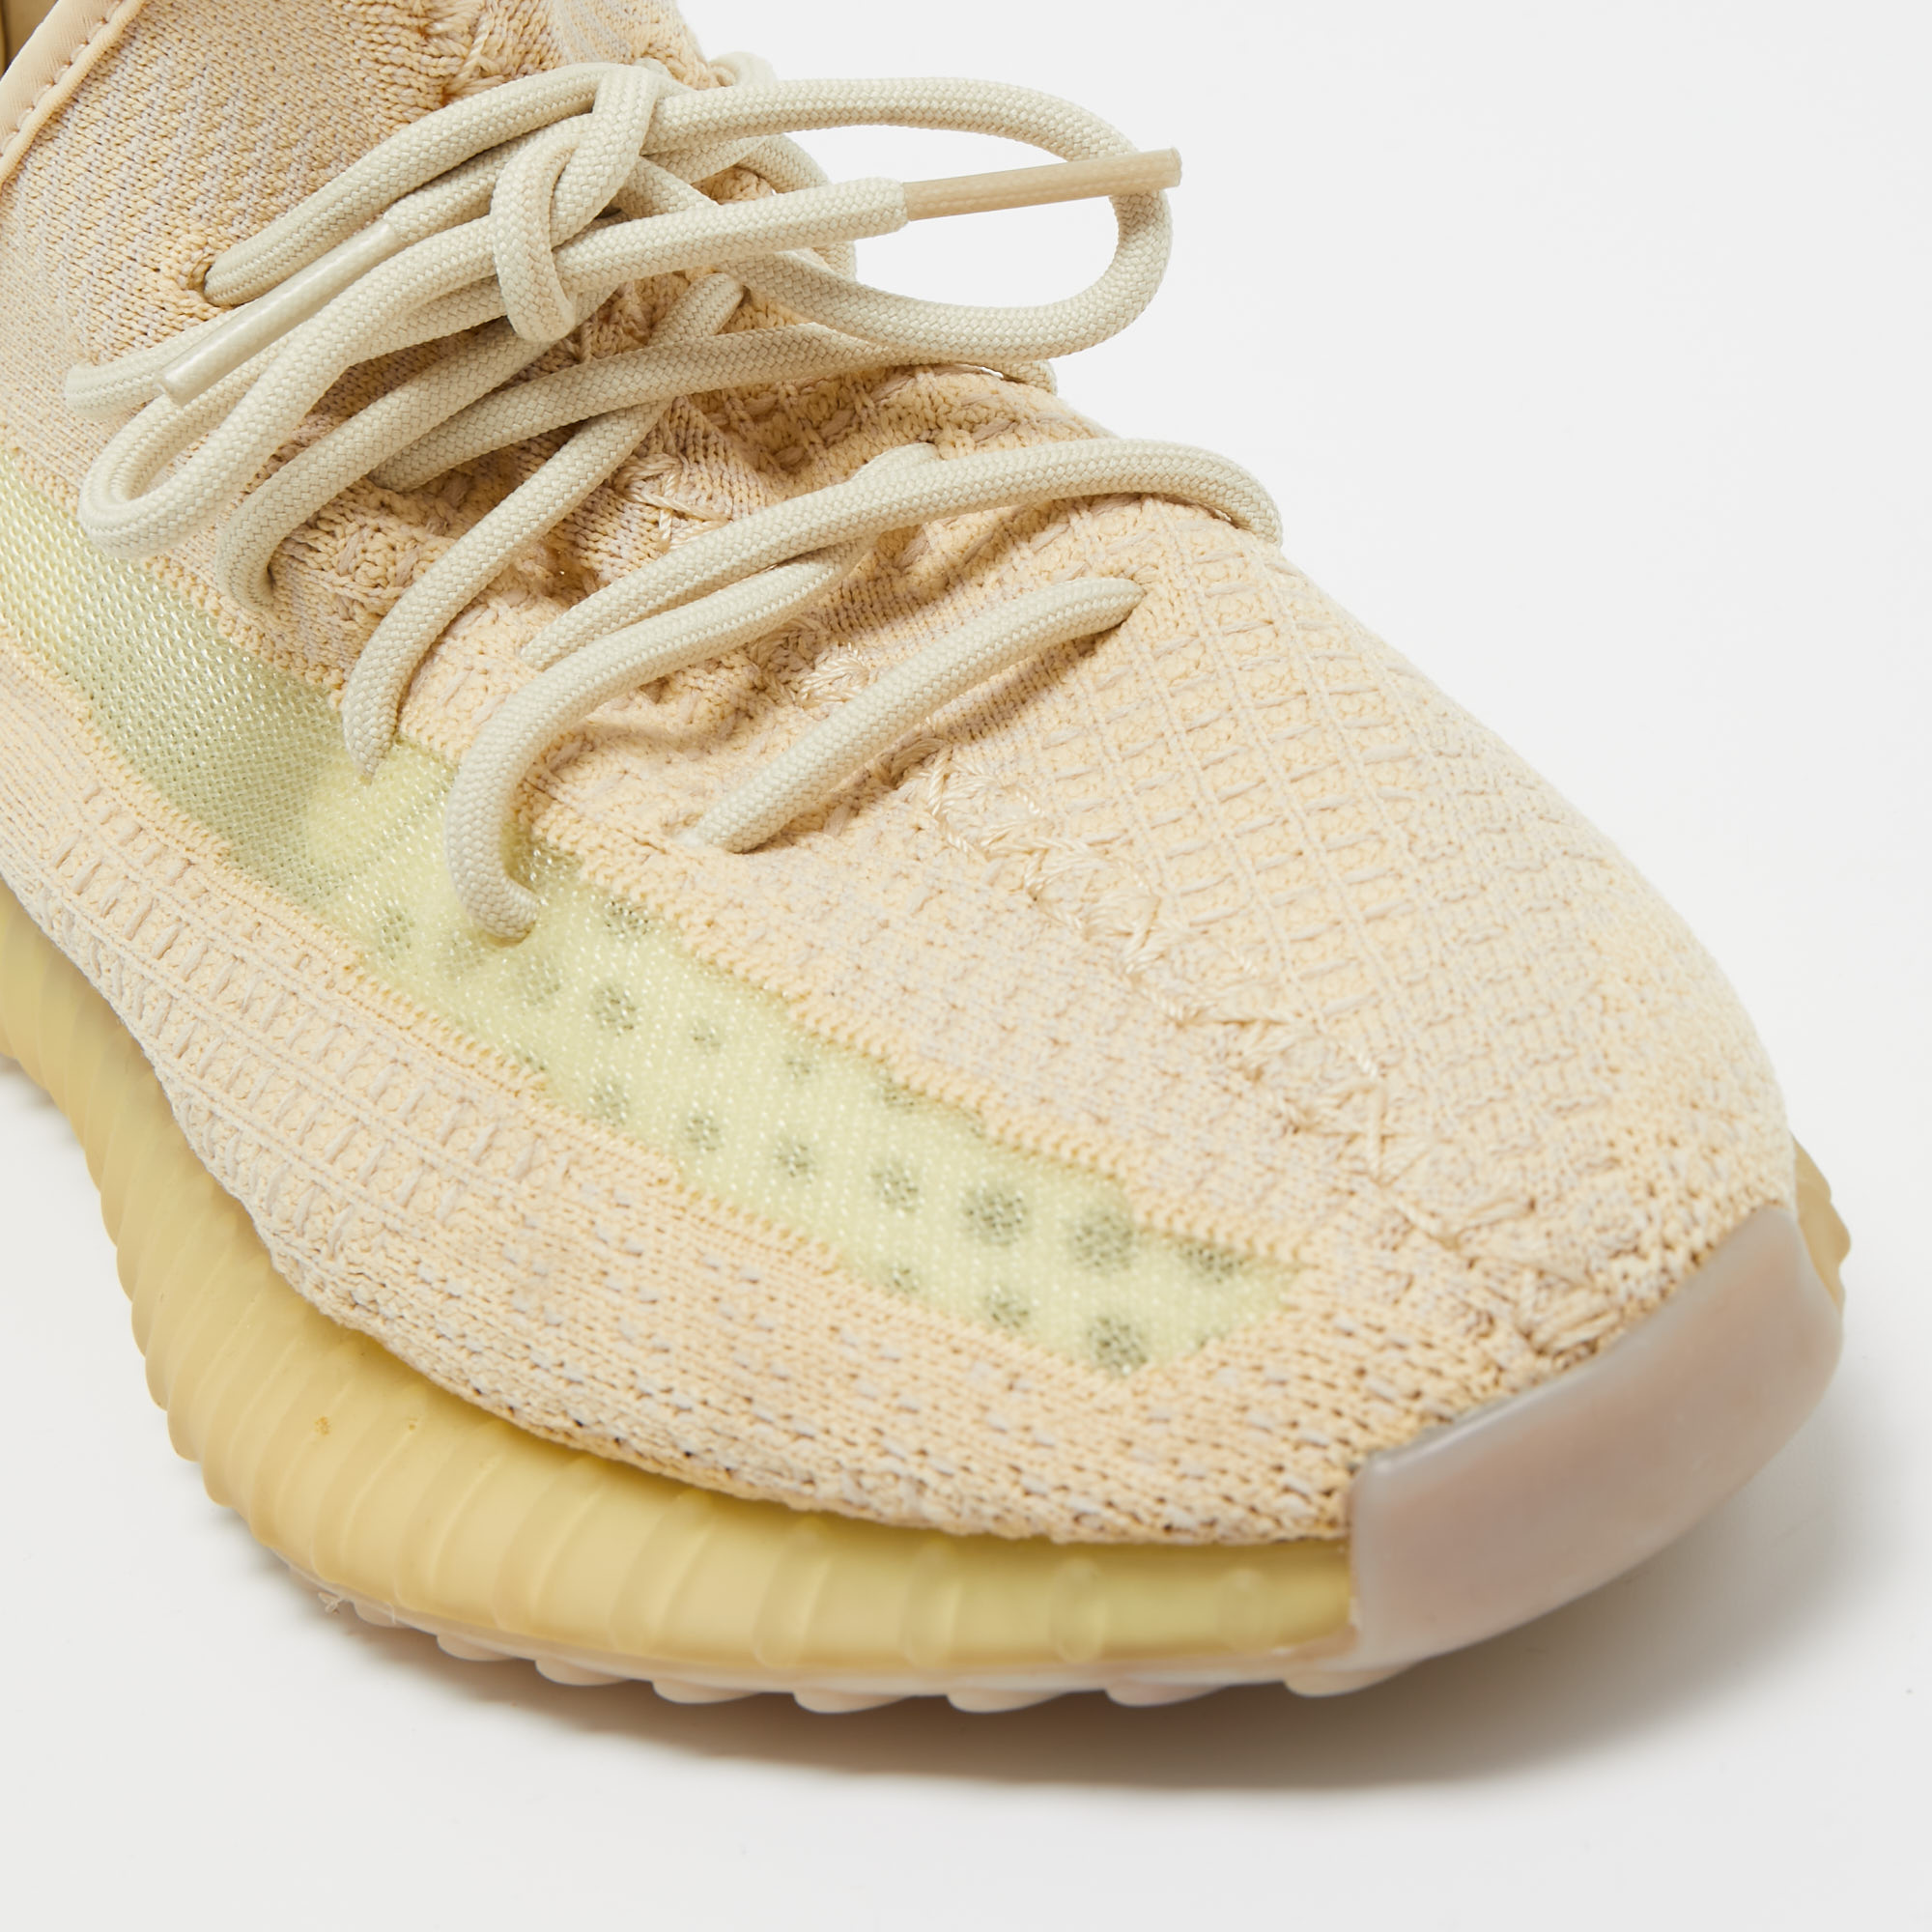 Yeezy X Adidas Cream Knit Fabric Boost 350 V2-Flax Sneakers Size 44 2/3